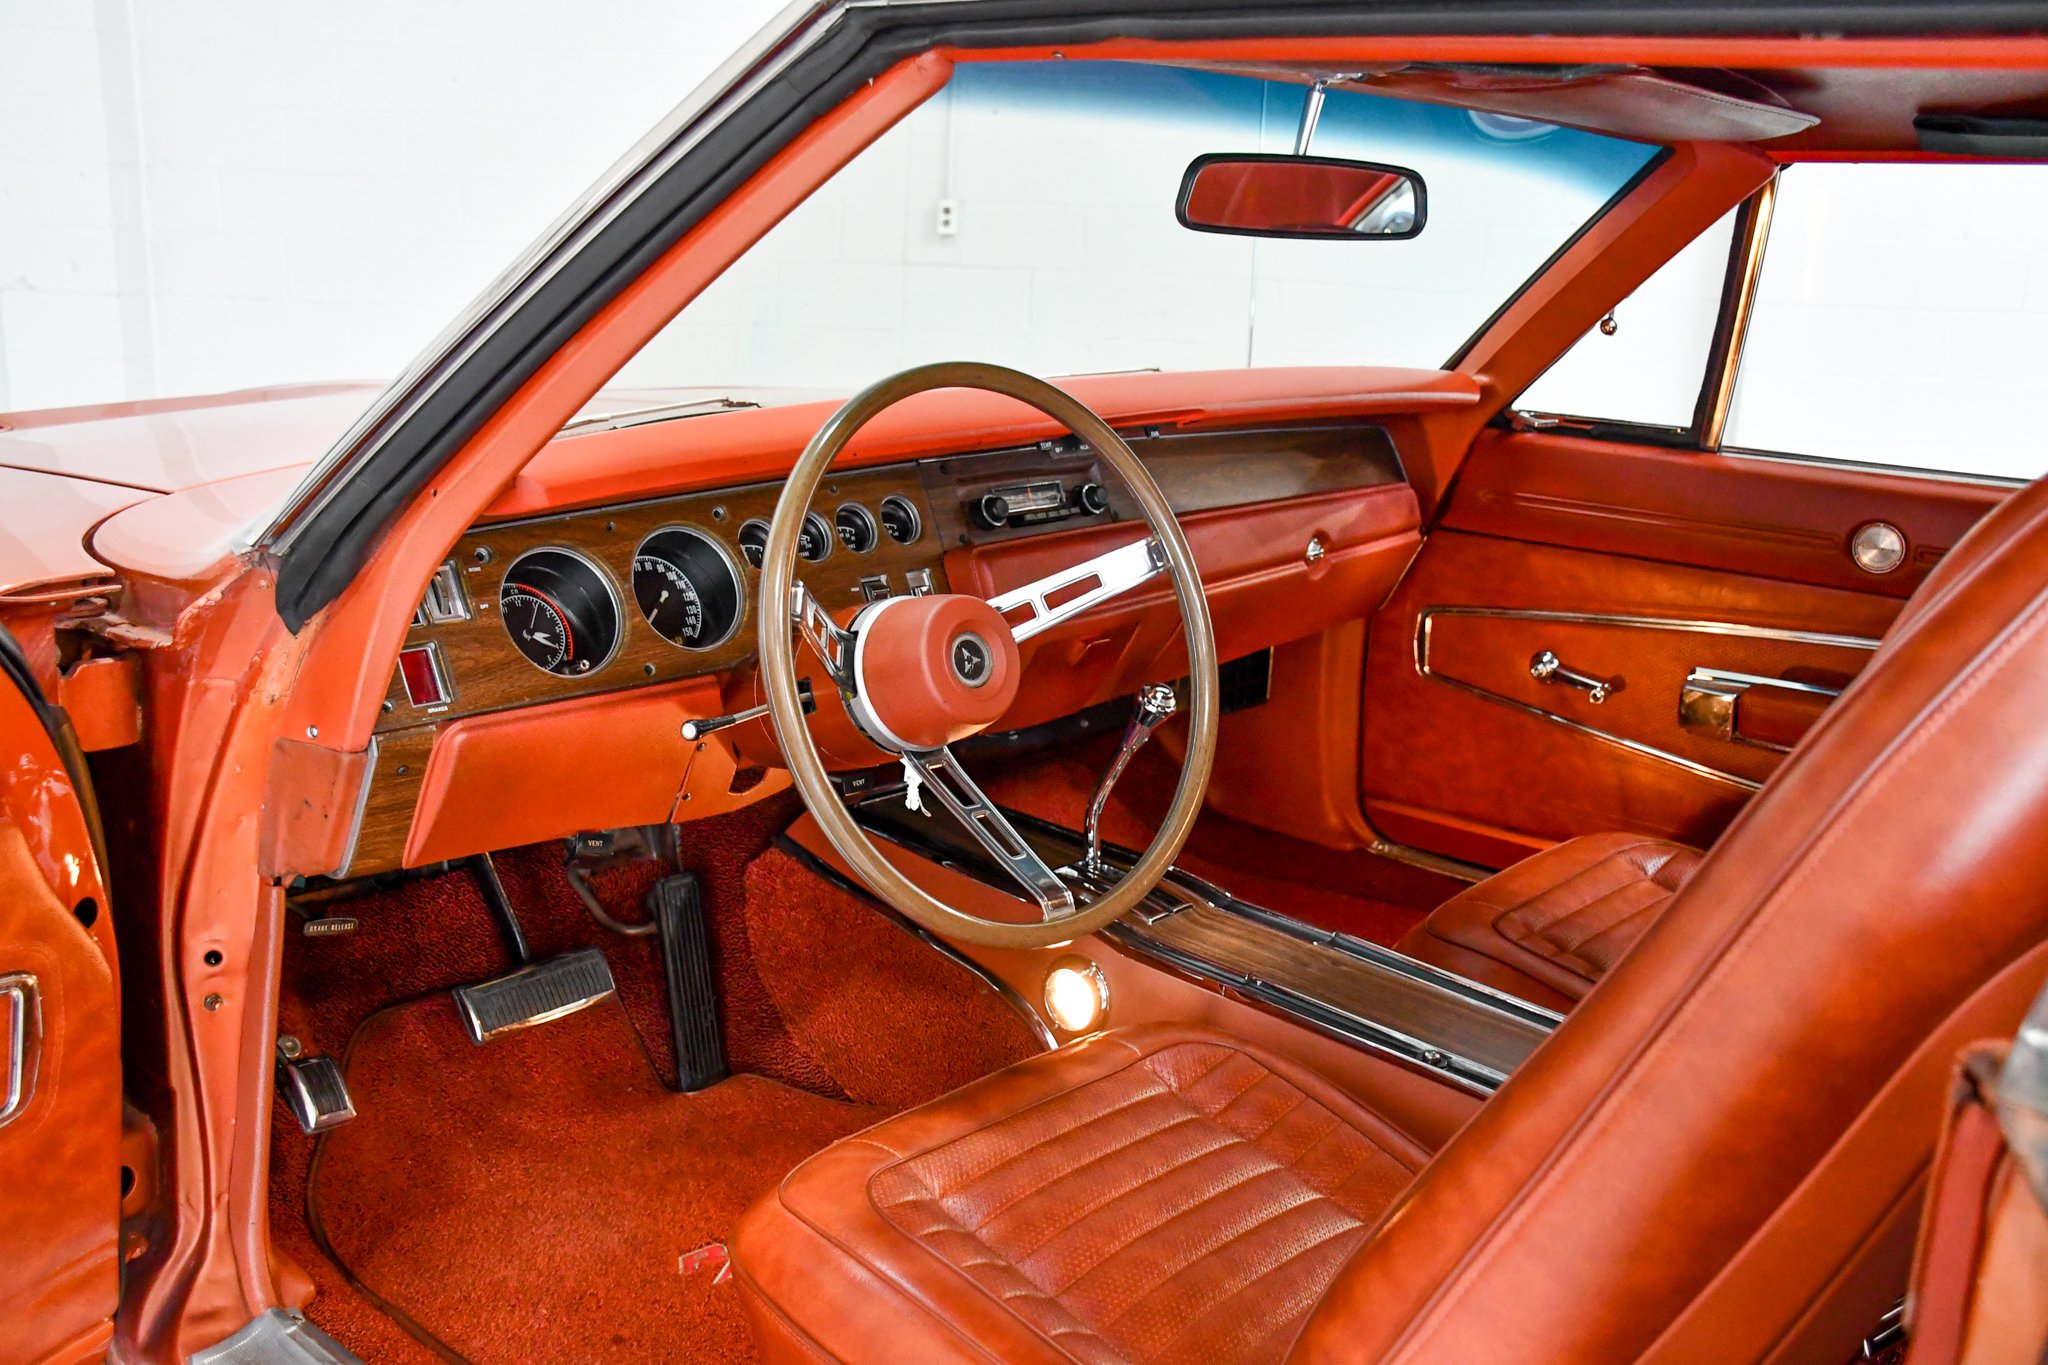 1970 Dodge Charger RT interior.